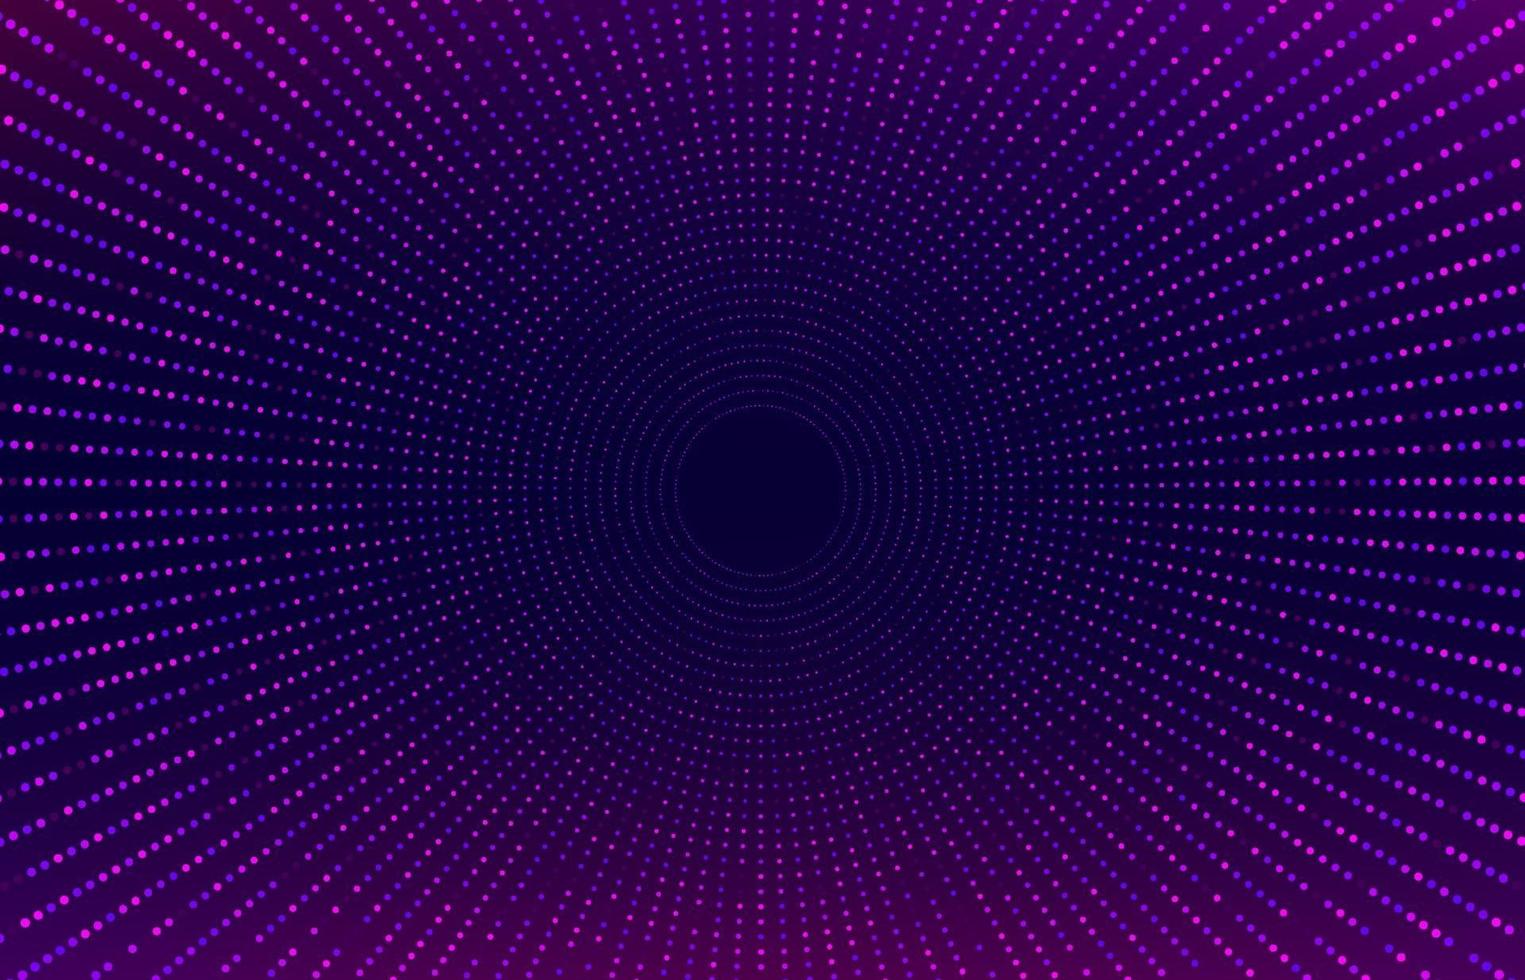 Abstract blue purple glowing halftone glittering effect with dot radial pattern and glowing lights on dark background. Modern futuristic technology concept. vector